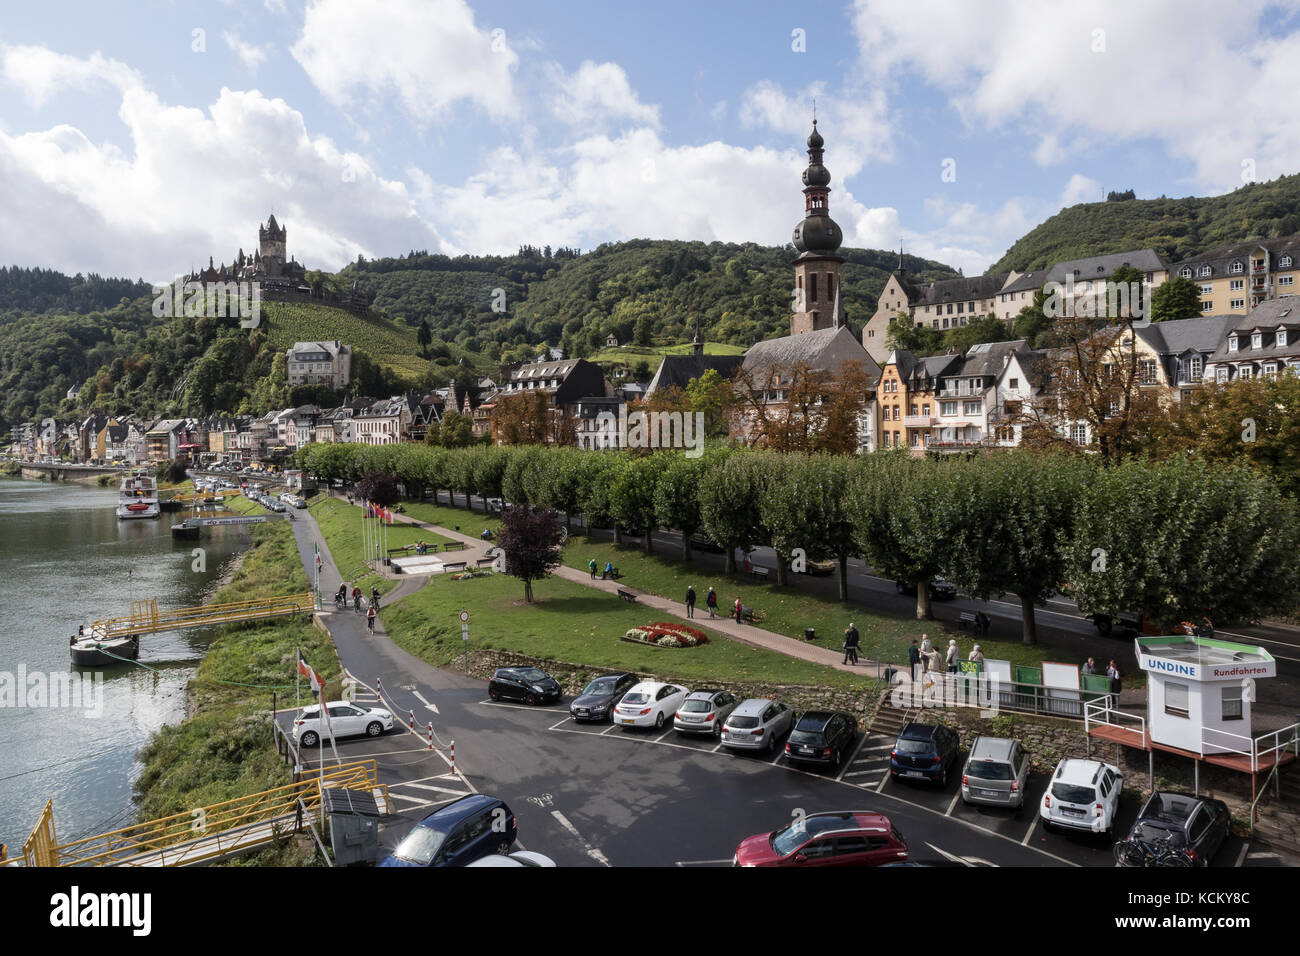 The town of Cochem, in the Mosel Valley, Germany River Mosel is shown. Stock Photo